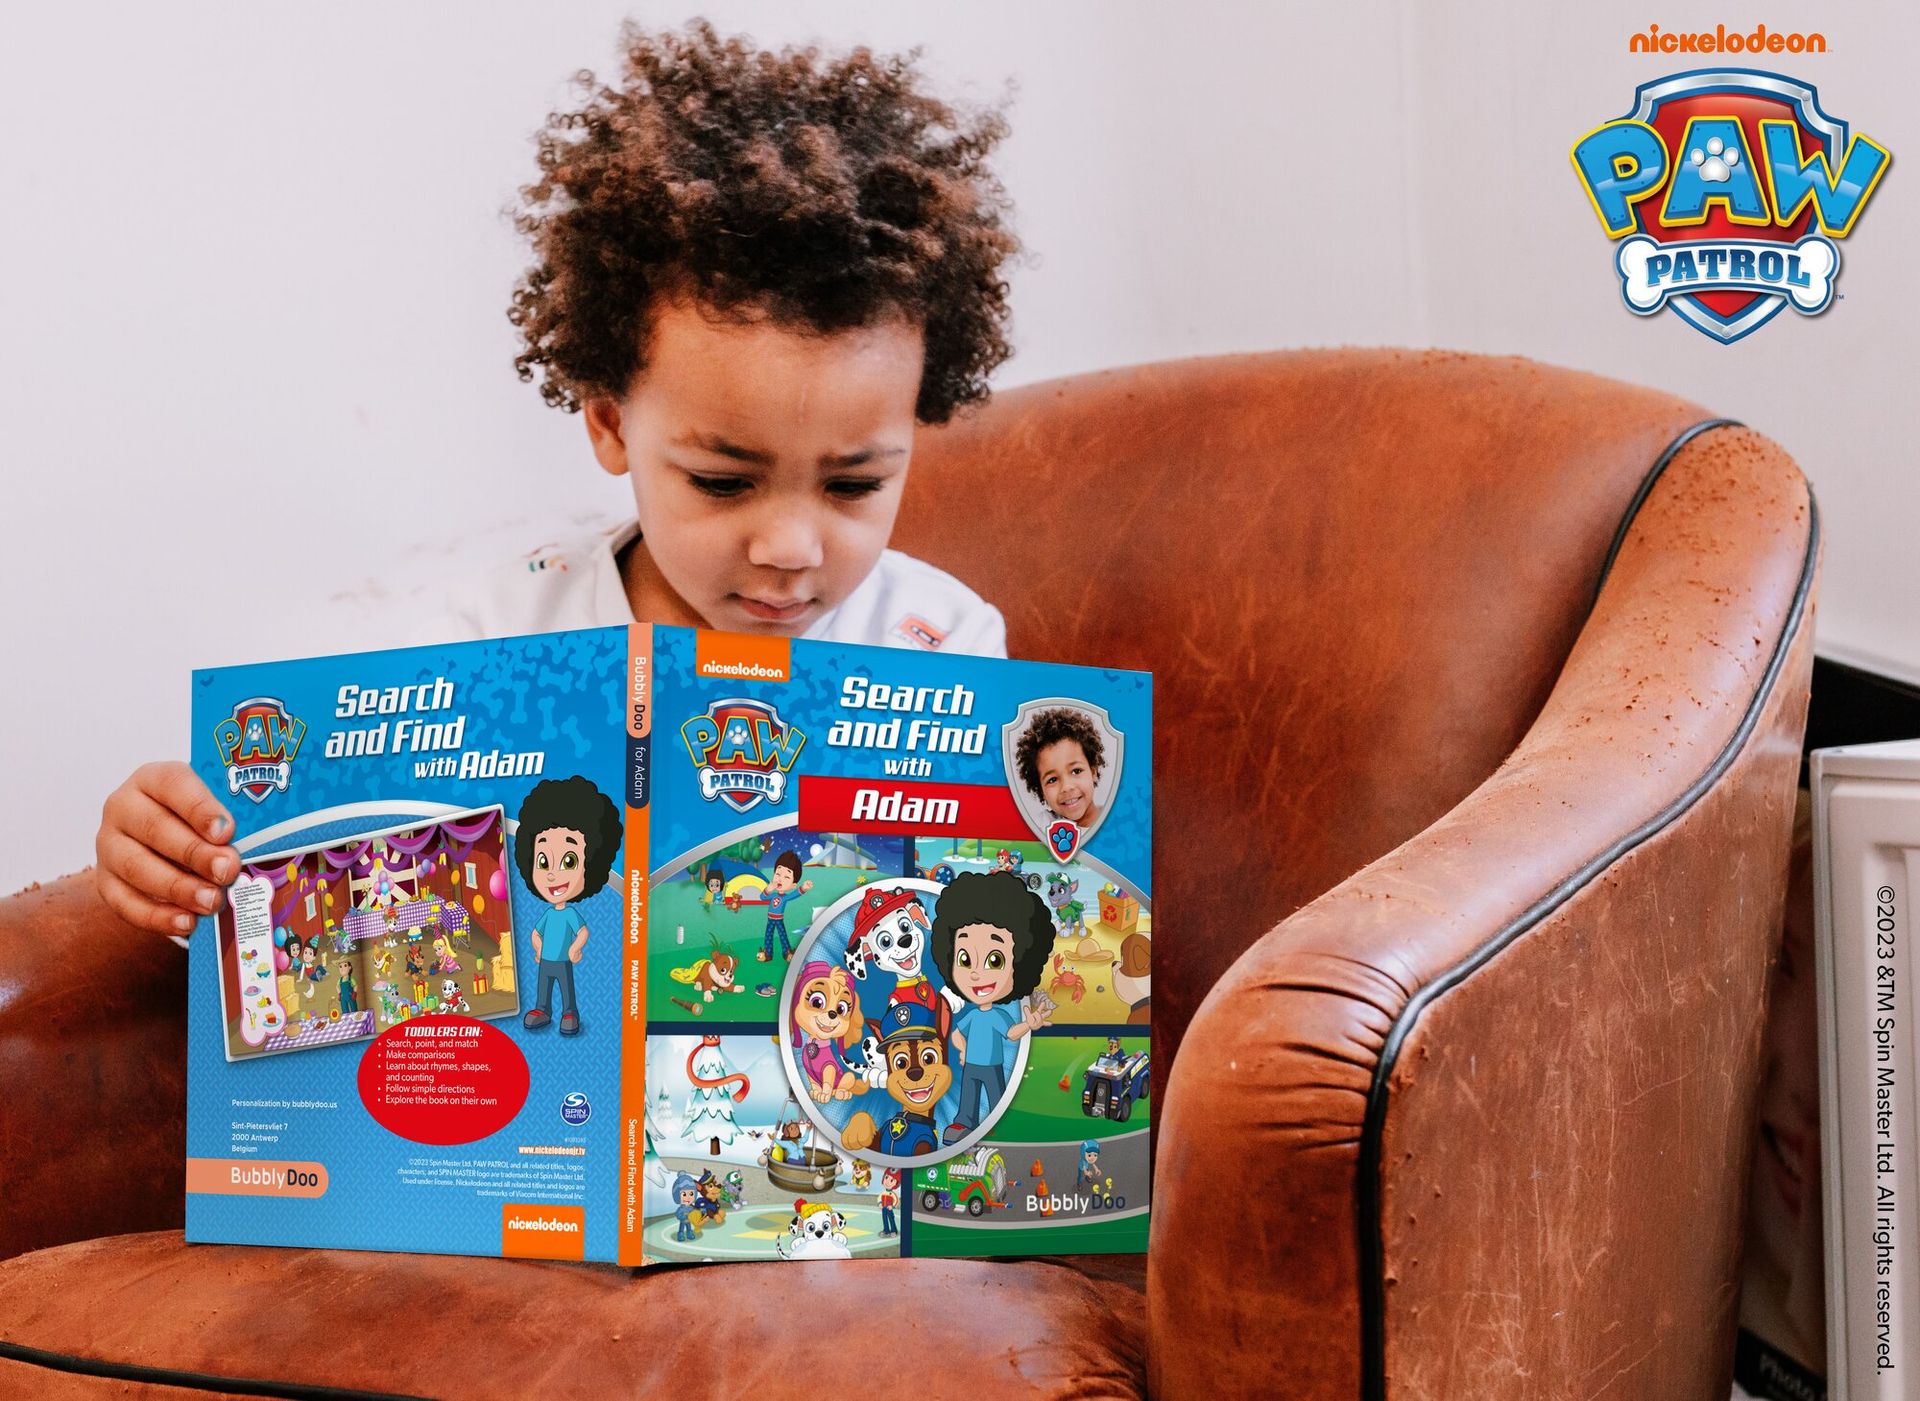 Your child and the PAW Patrol together in one Search and Find book!